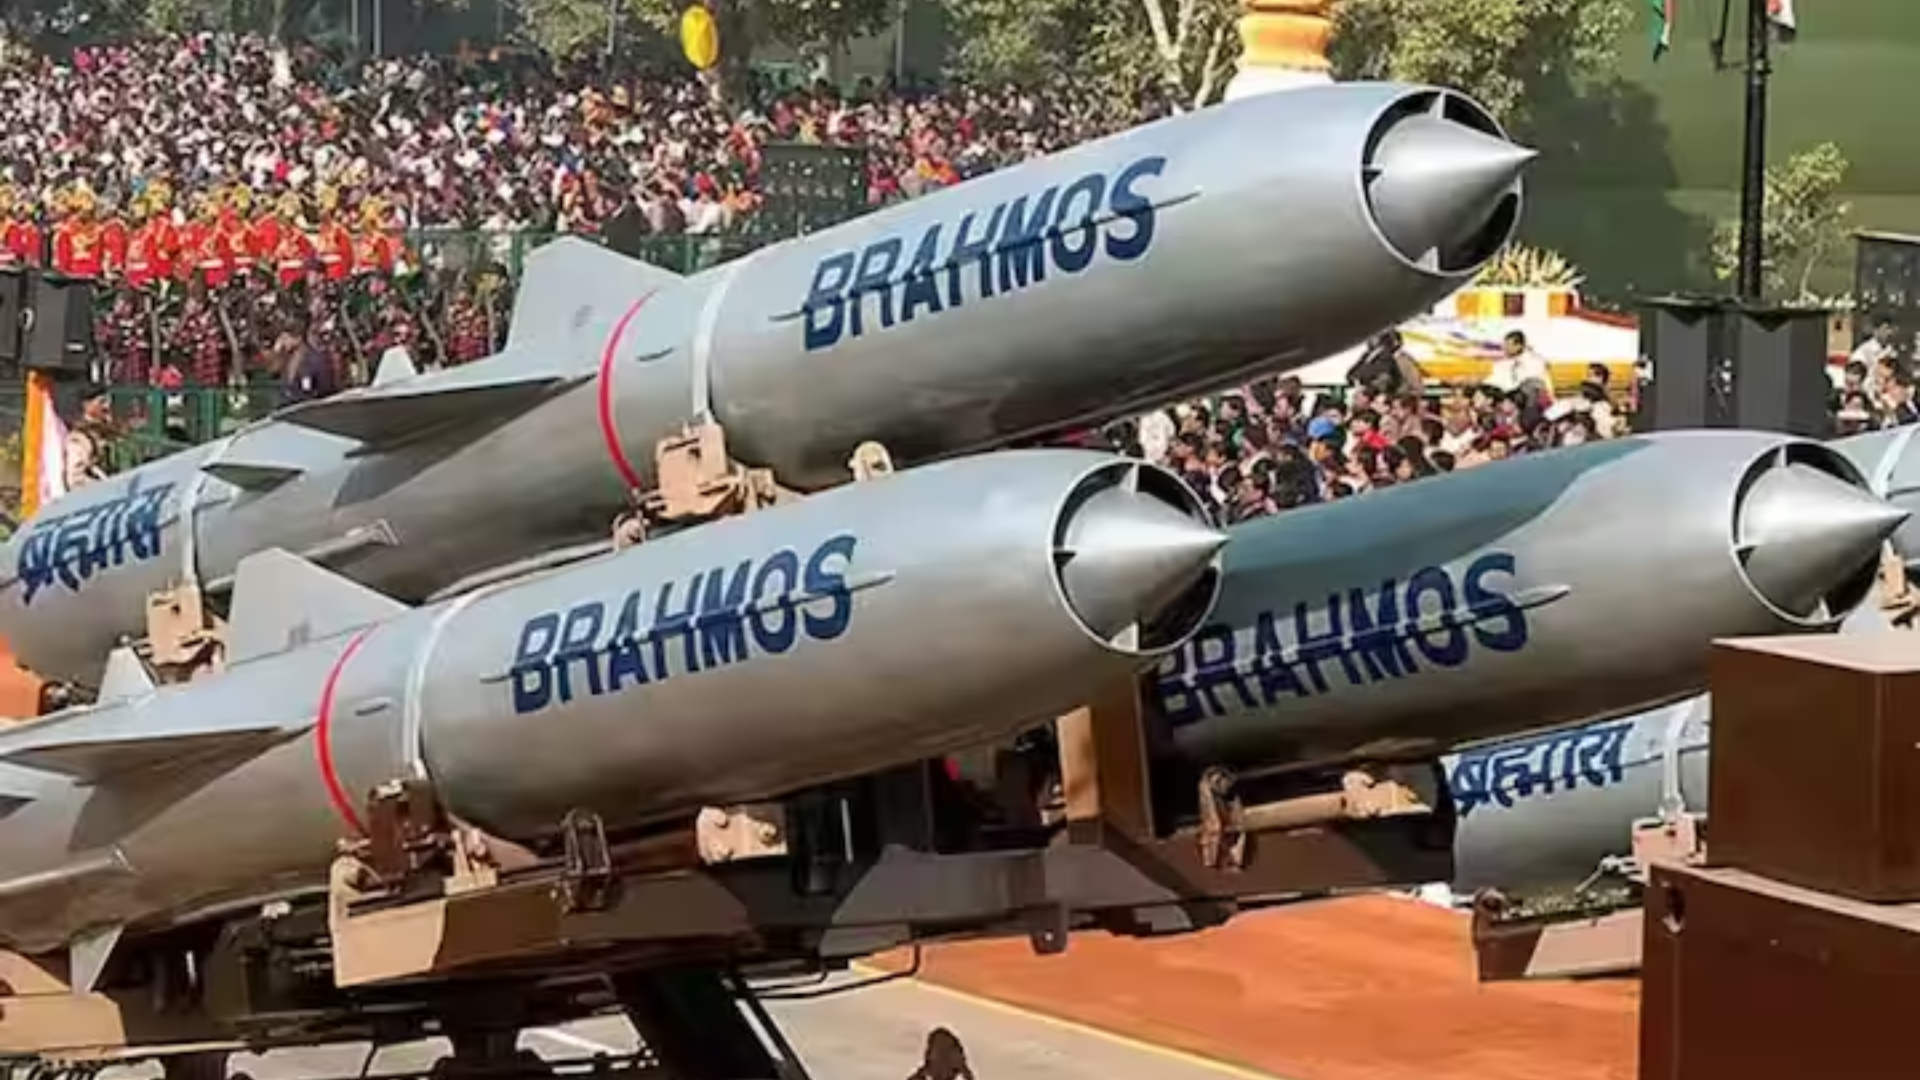 Indian Navy Secures Acquisition of Over 200 BrahMos Missiles in Landmark Deal